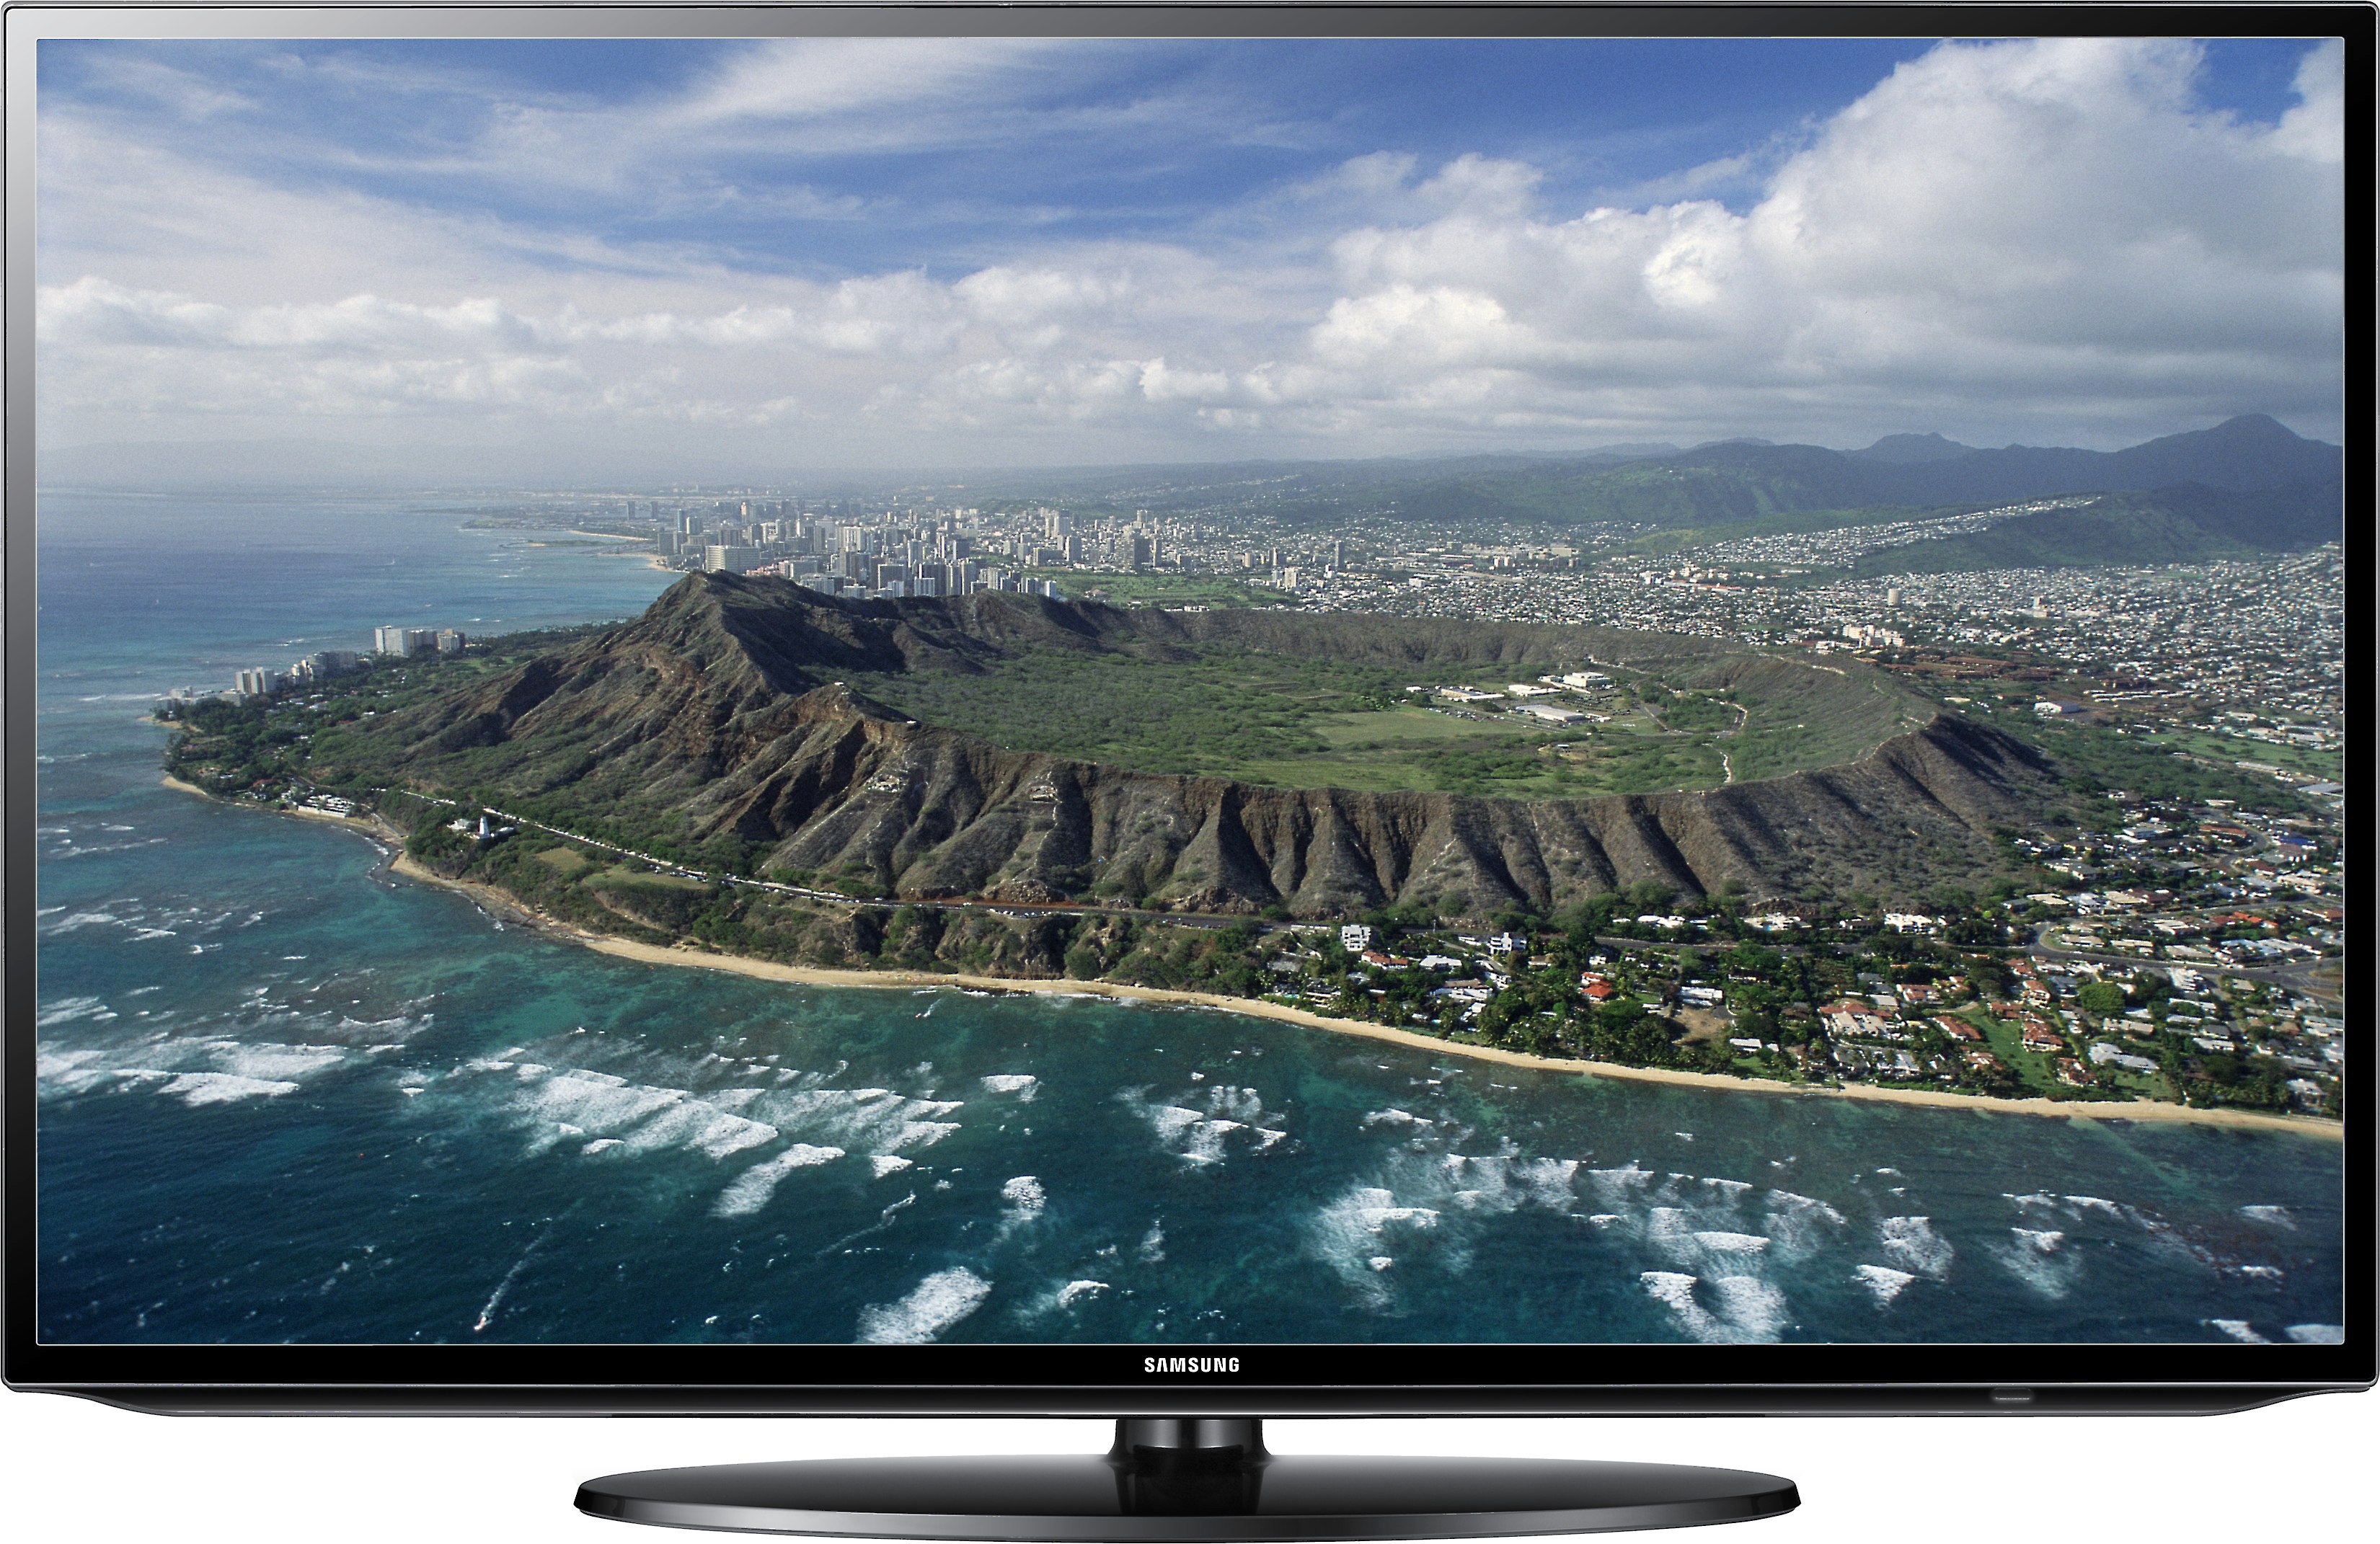 Samsung Un32eh5300 32 1080p Led Lcd Hdtv With Wi Fi At Crutchfield